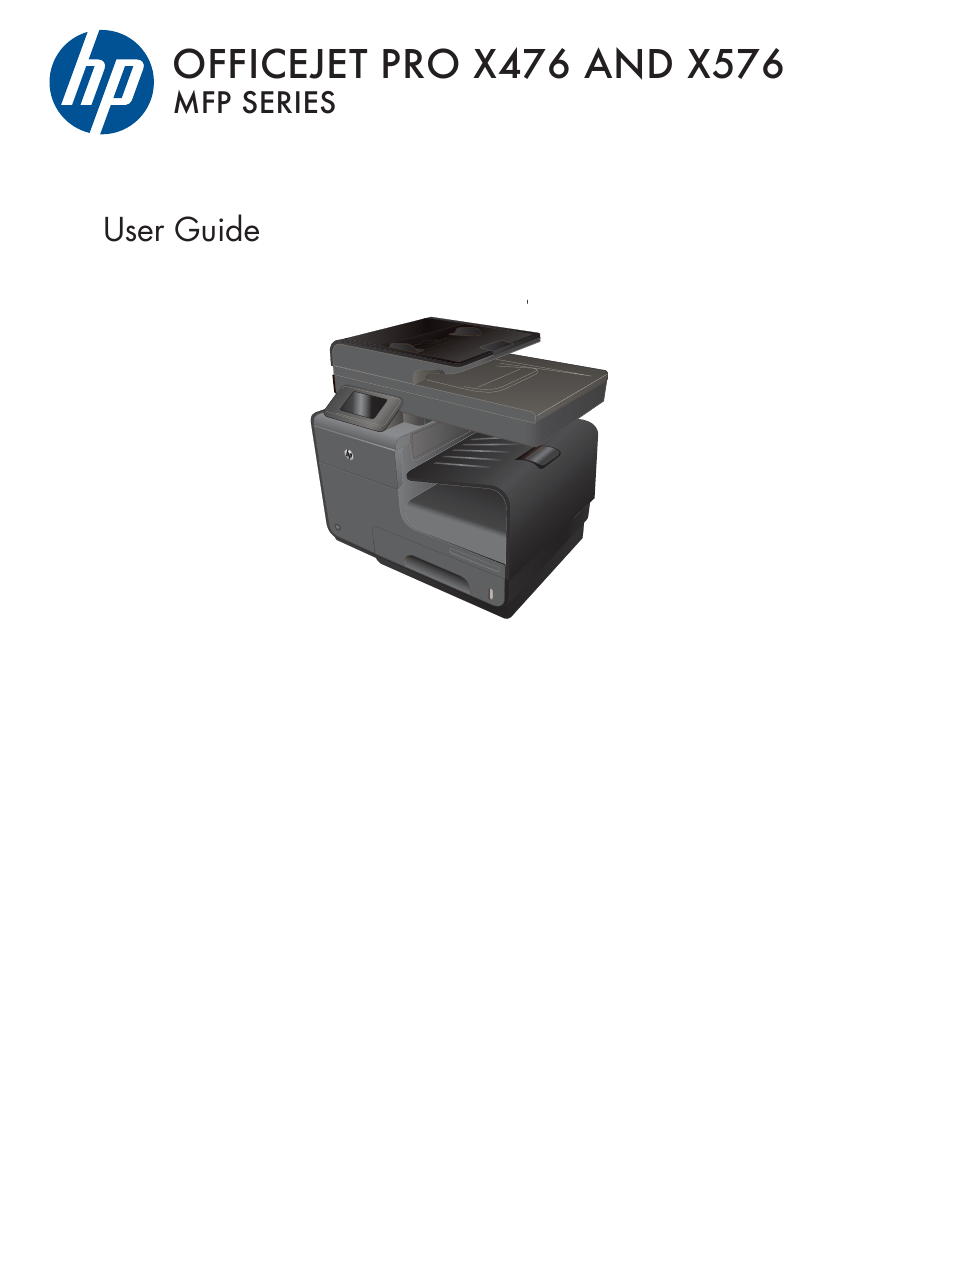 HP Officejet Pro X576 Multifunction Printer series User Manual | 336 pages  | Also for: Officejet Pro X476 Multifunction Printer series